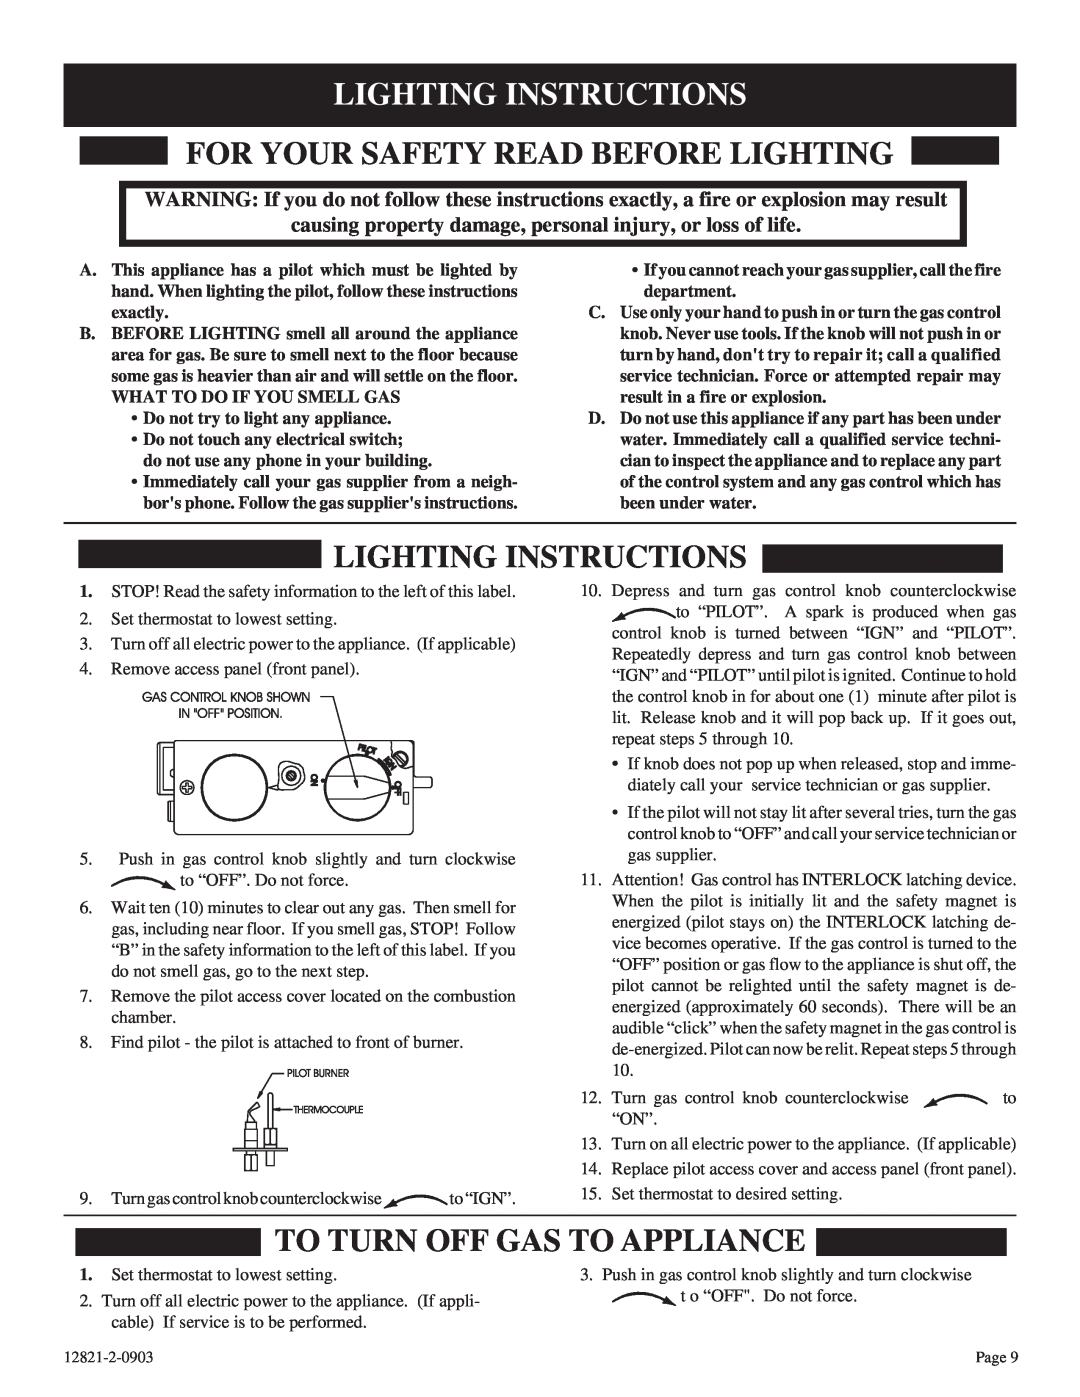 Empire Products RH-25-6, RH-35-6 Lighting Instructions, For Your Safety Read Before Lighting, To Turn Off Gas To Appliance 